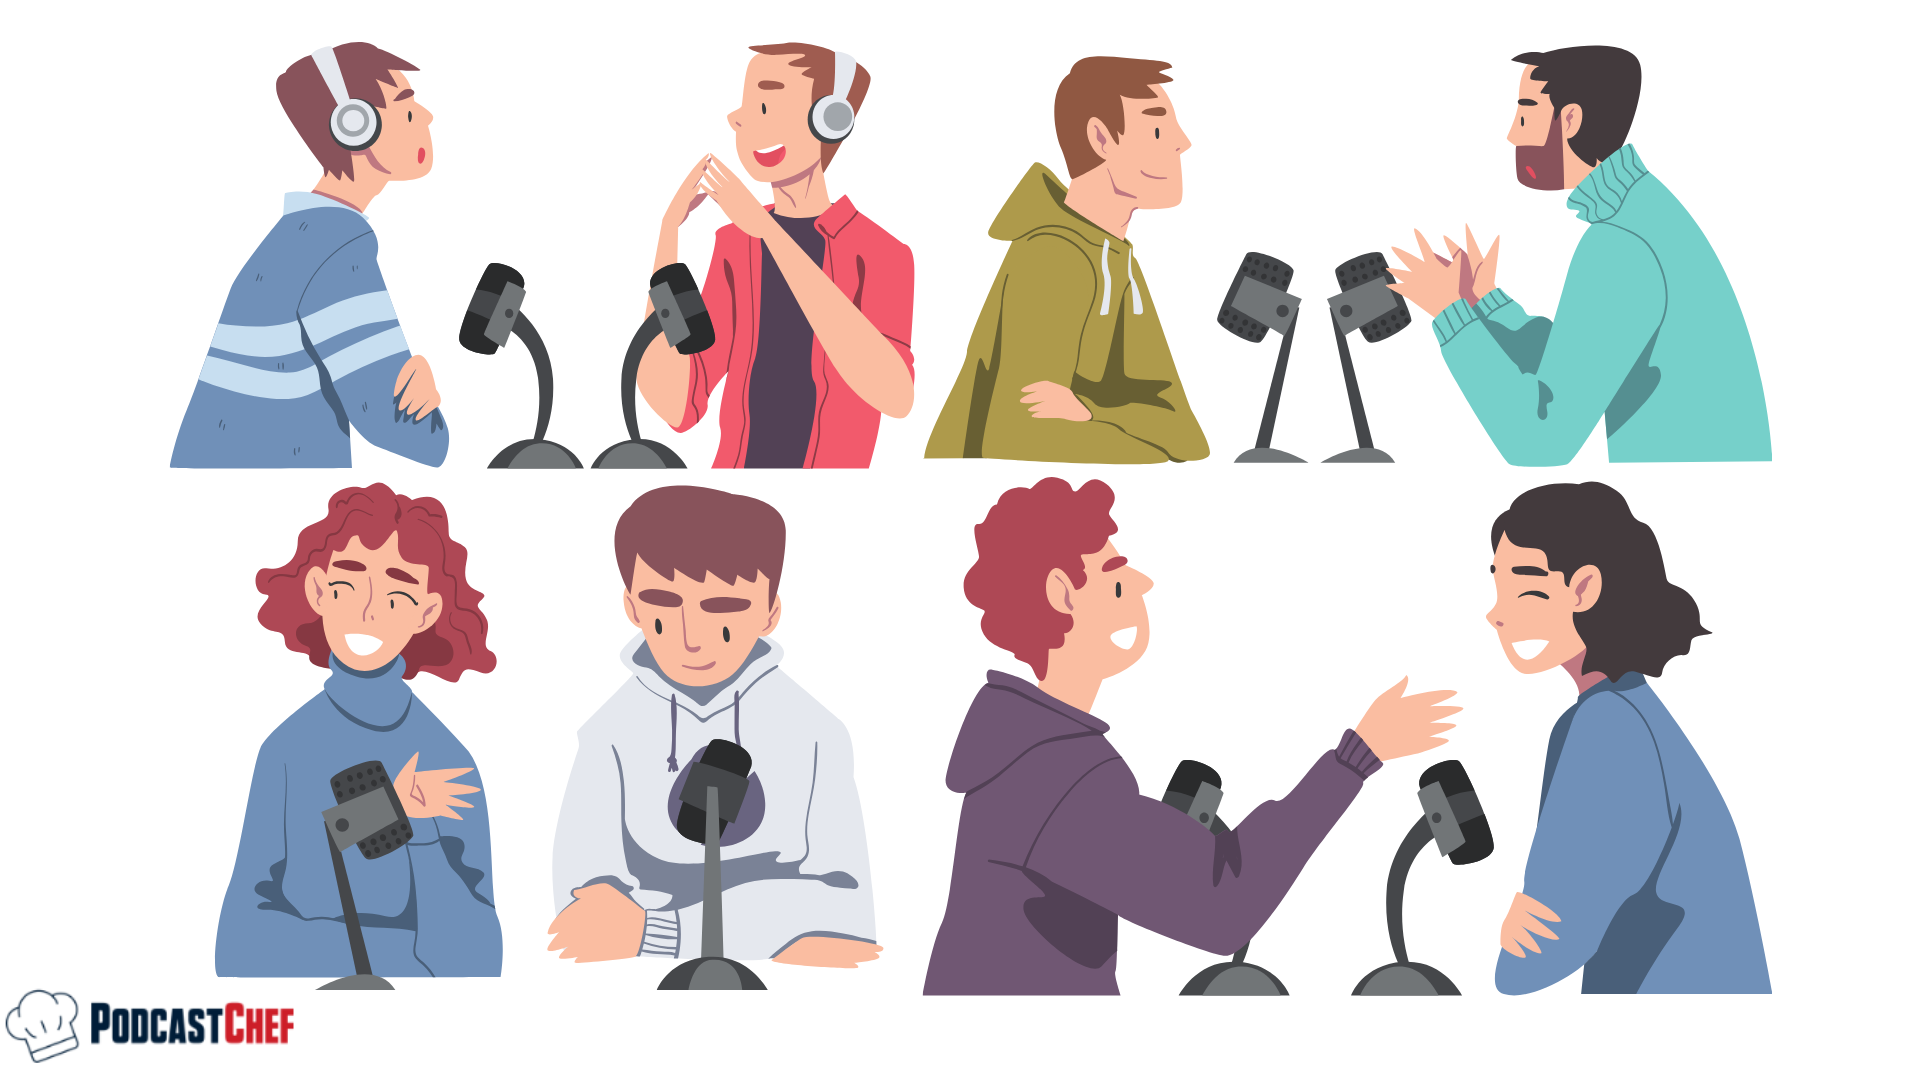 Launching your podcast by finding the right guests and collaborators